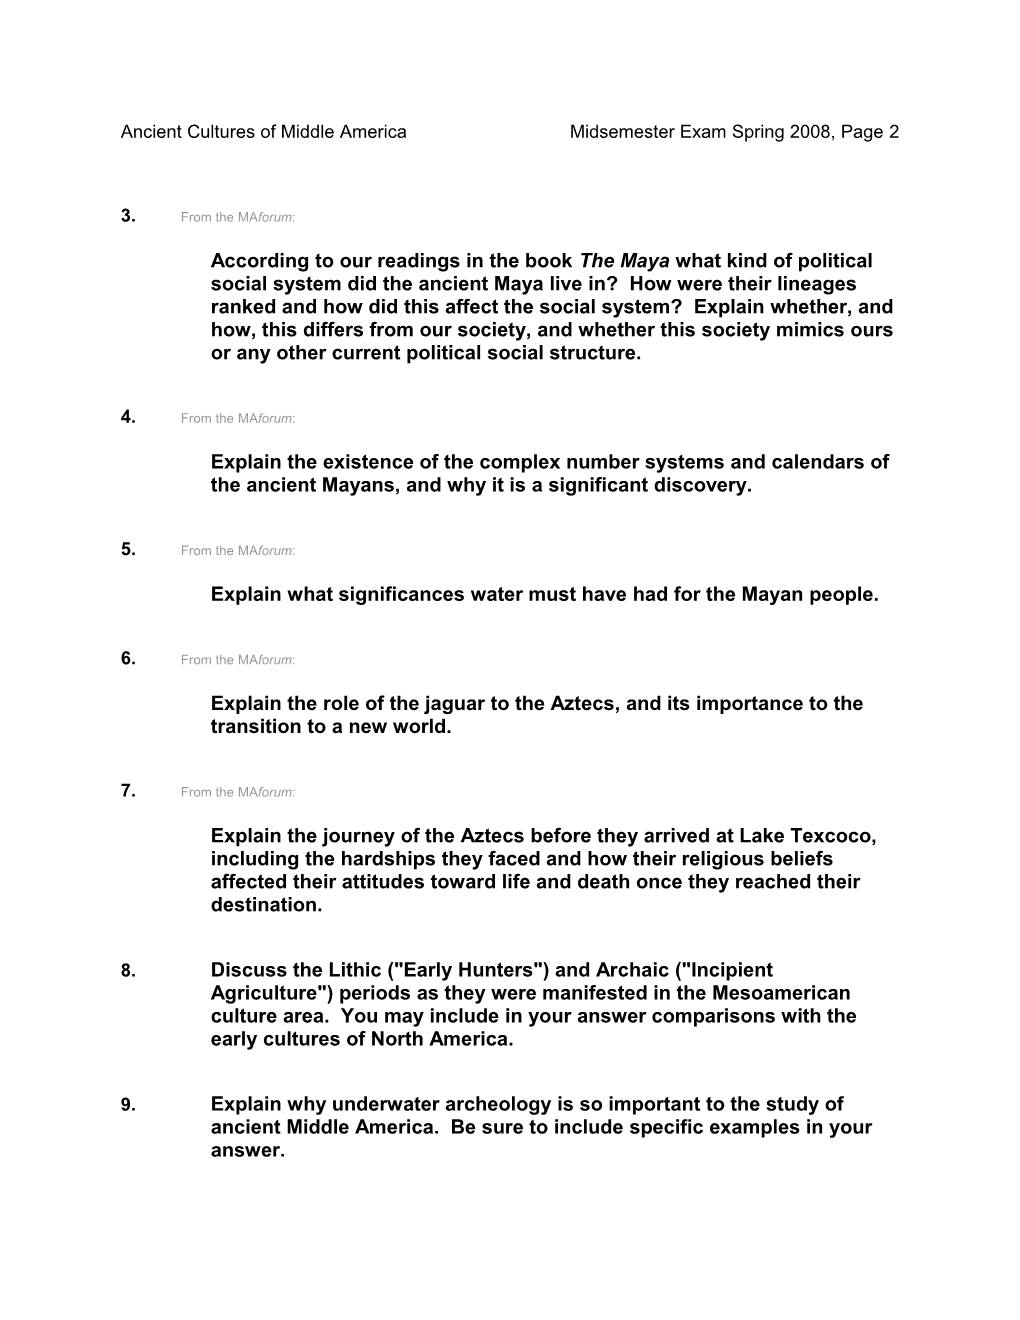 Ancient Cultures of Middle America Midsemester Exam Spring 2008, Page 1